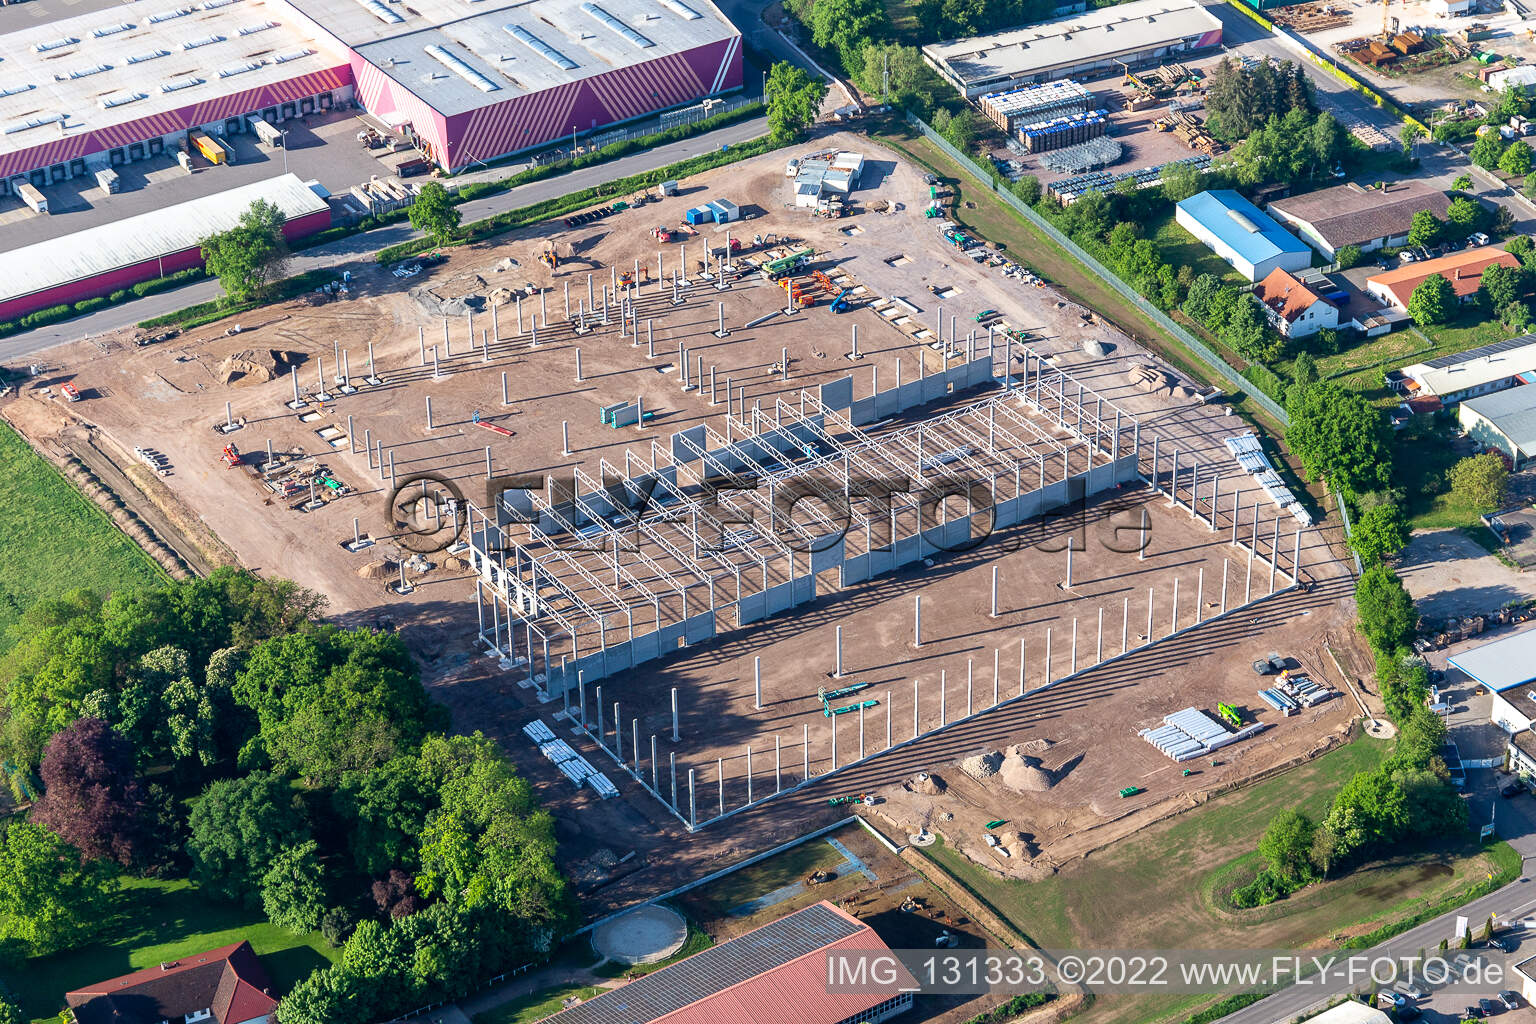 Aerial photograpy of Hornbach Construction site of the Hornbach logistics center Essingen in Essingen in the state Rhineland-Palatinate, Germany